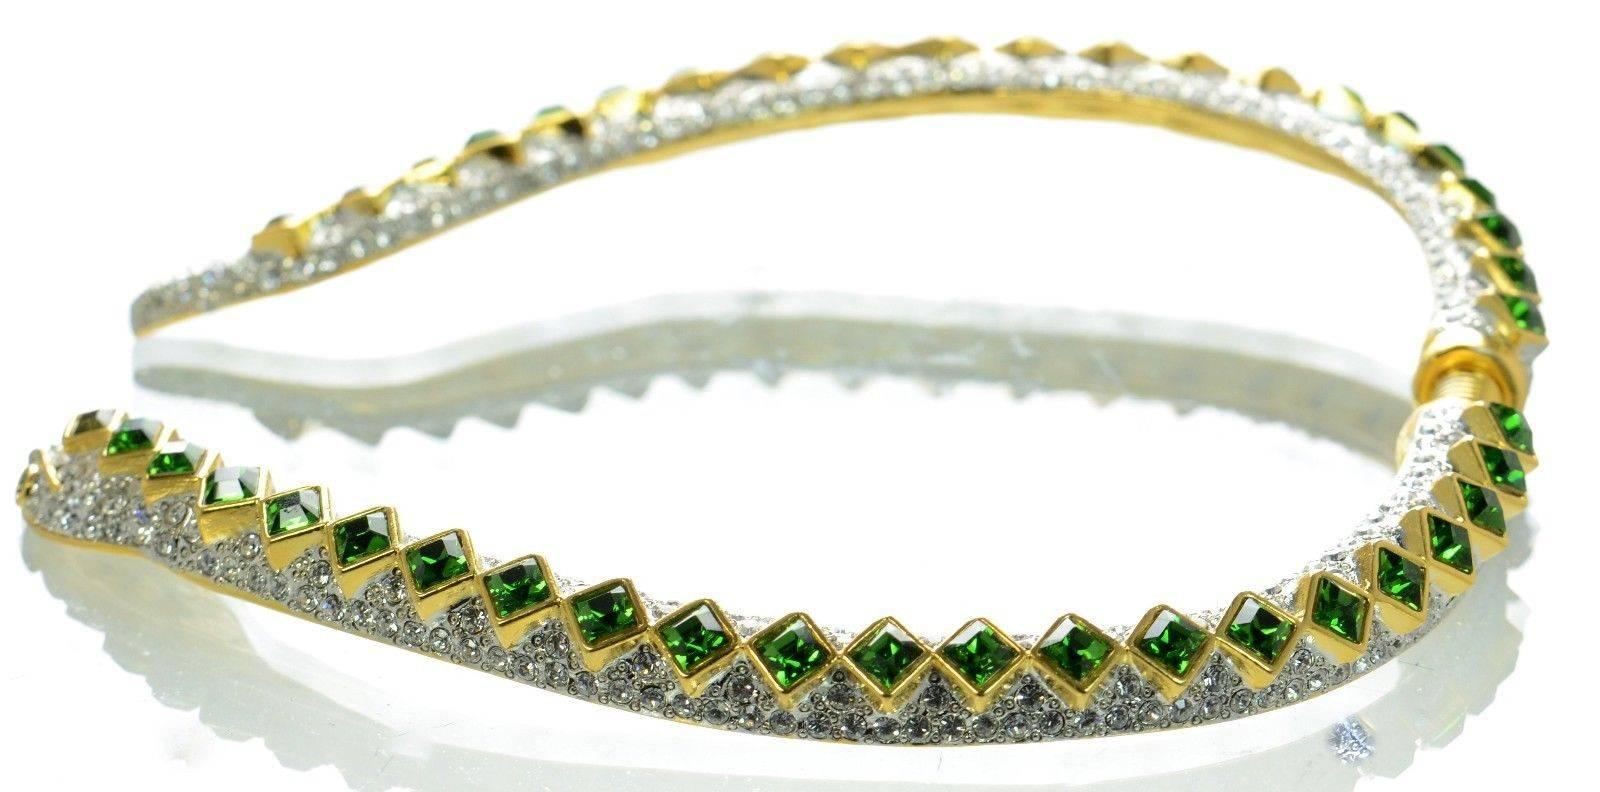 Contemporary Signed Kenneth J Lane KJL Faux Diamond and Faux Emerald Snake Runway Necklace